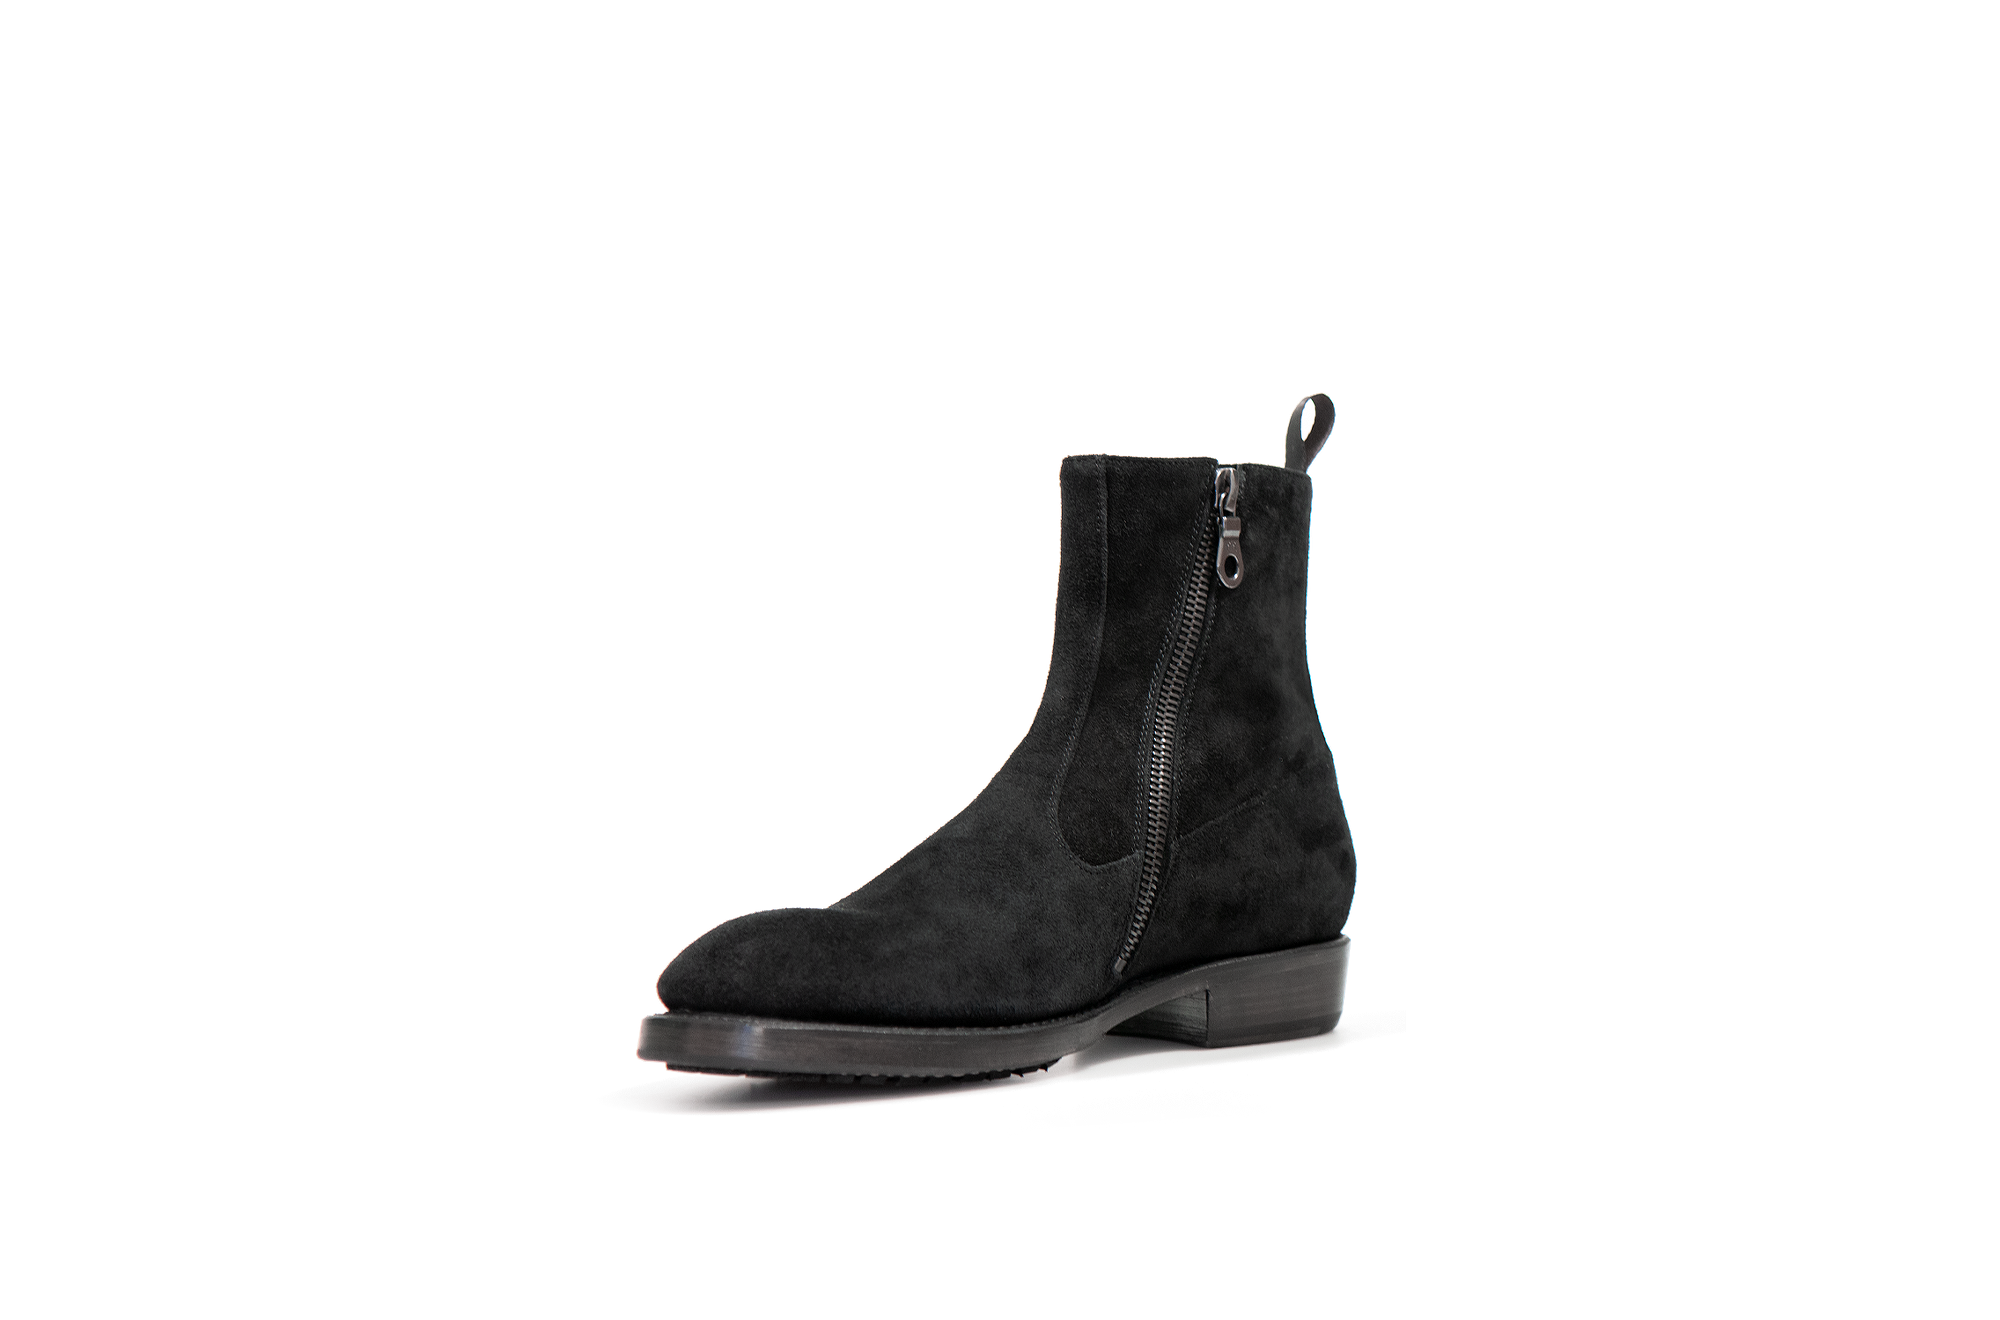 Axwell Black Suede Leather Zipper Boots